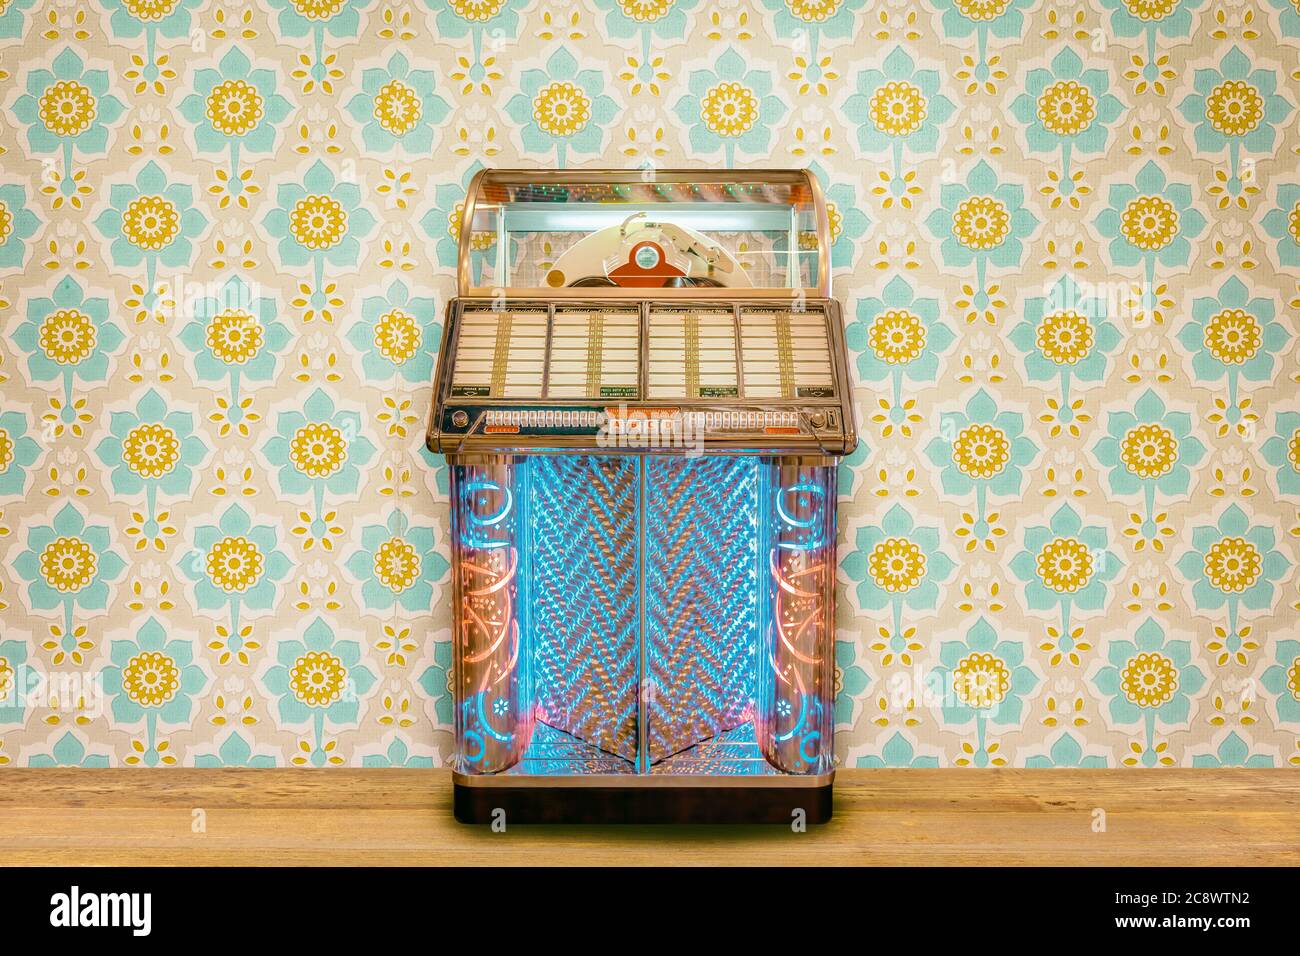 Colorful vintage jukebox in front of retro flower wallpaper on a wooden floor Stock Photo